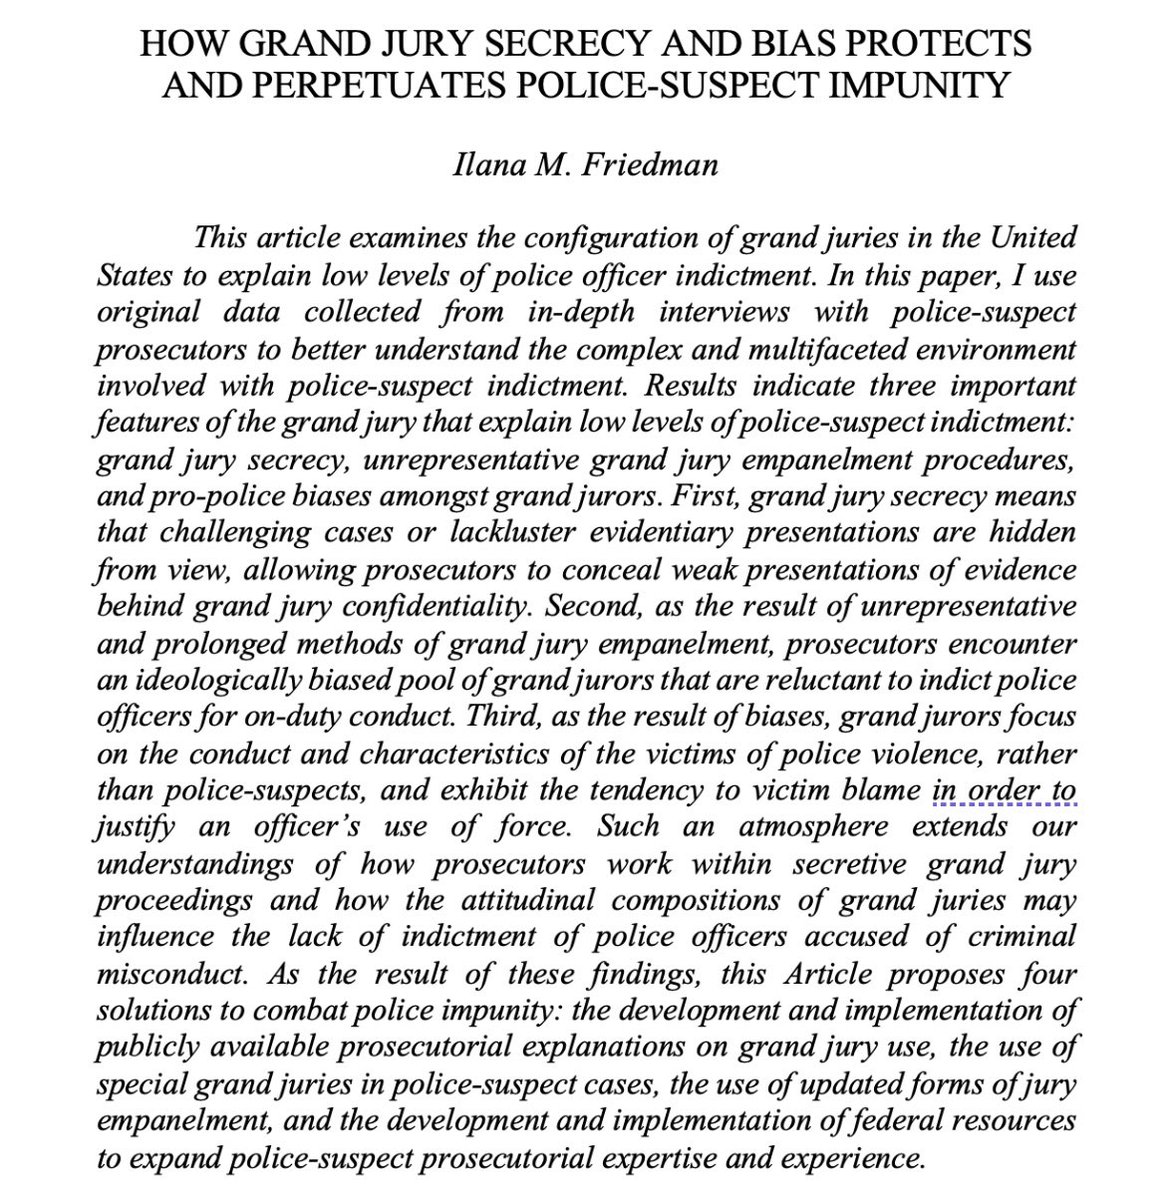 Honored to announce that my article examining the crucial role that grand juries play in protecting & perpetuating police-suspect impunity is forthcoming in @OregonLawReview! It’s also available on SSRN — I’d love to hear your feedback.